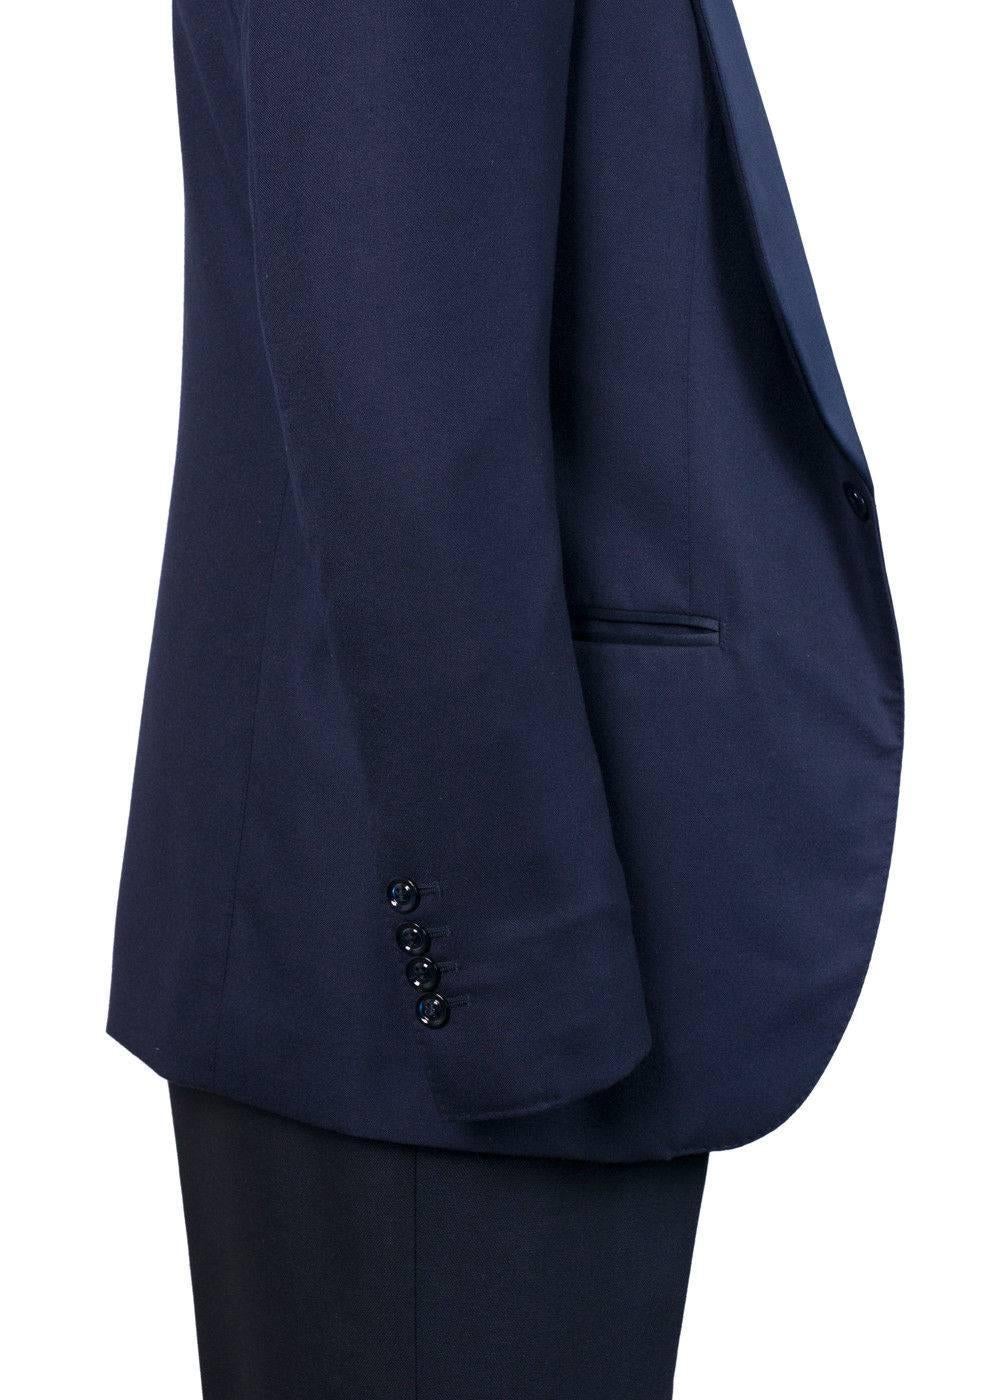 Brunello Cucinelli Navy 100% Cashmere Satin Lapel Cocktail Jacket In New Condition For Sale In Brooklyn, NY